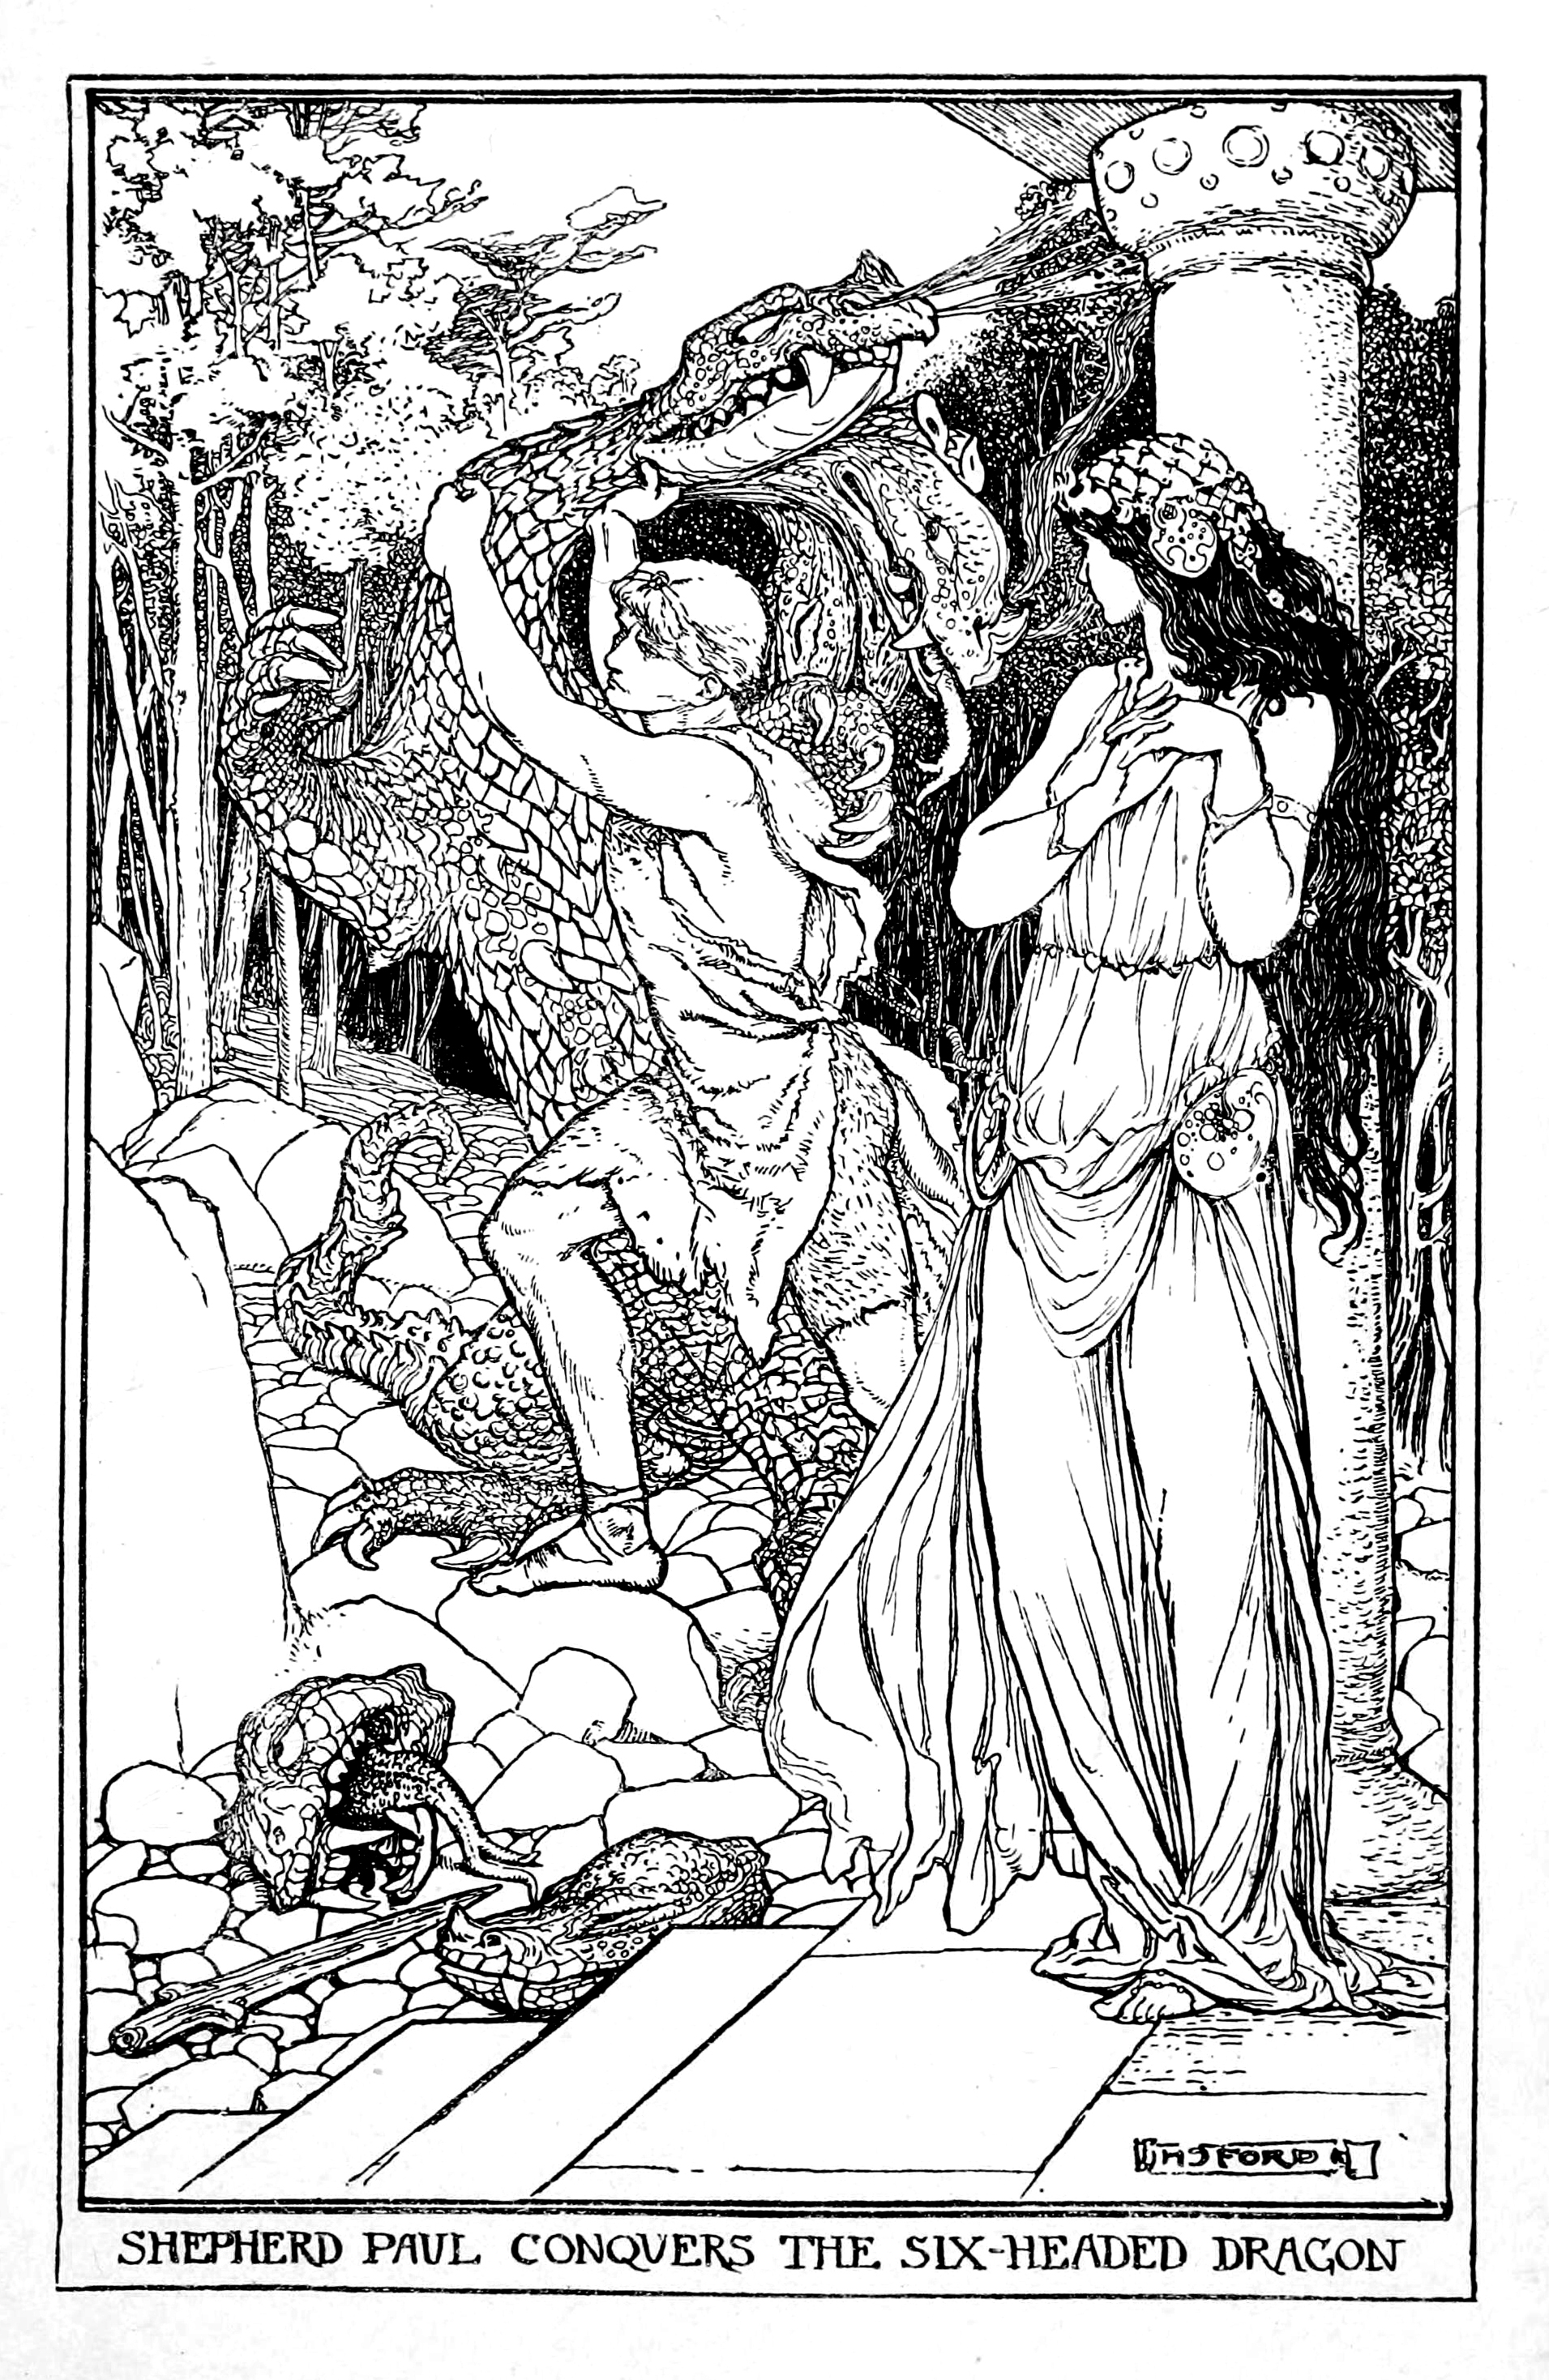 Henry Justice Ford - The crimson fairy book, edited by Andrew Lang, 1903 (illustration 11)